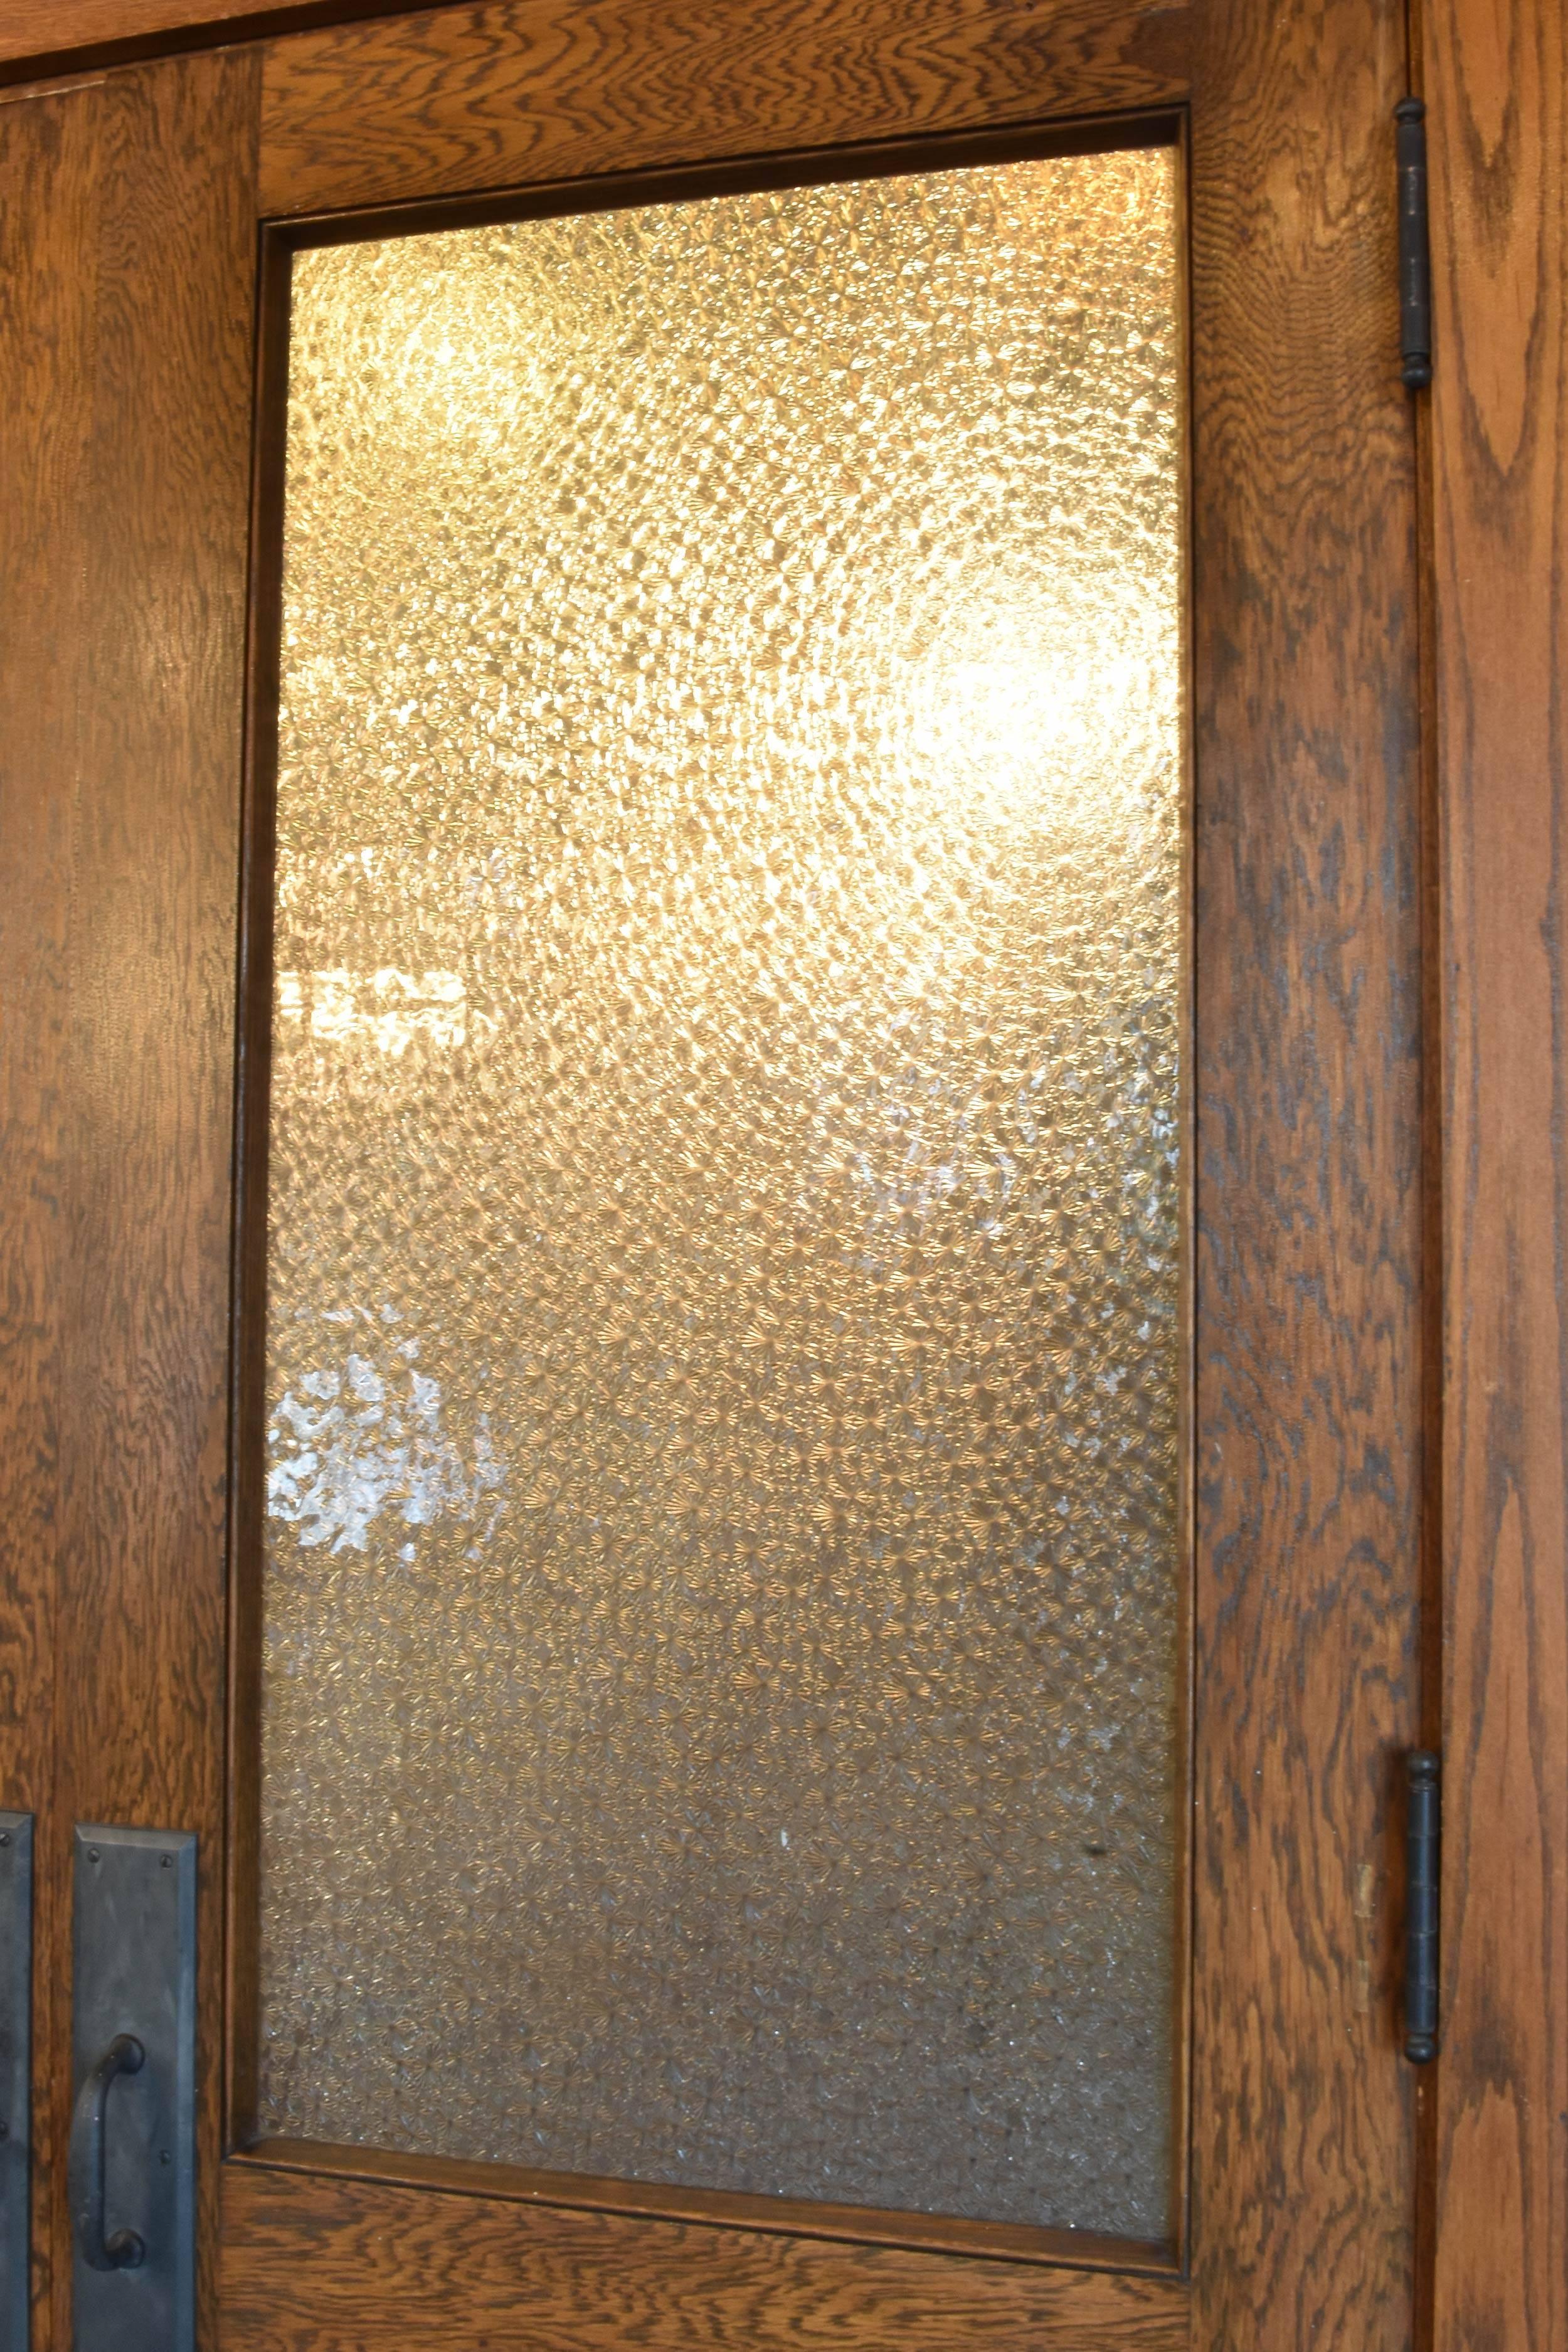 Featuring contrasted wood grain, textured snowflake glass, and iron hardware, these oak double doors are true beauties. The large windows offer natural light to come in while still granting adequate privacy. Originally from a schoolhouse in